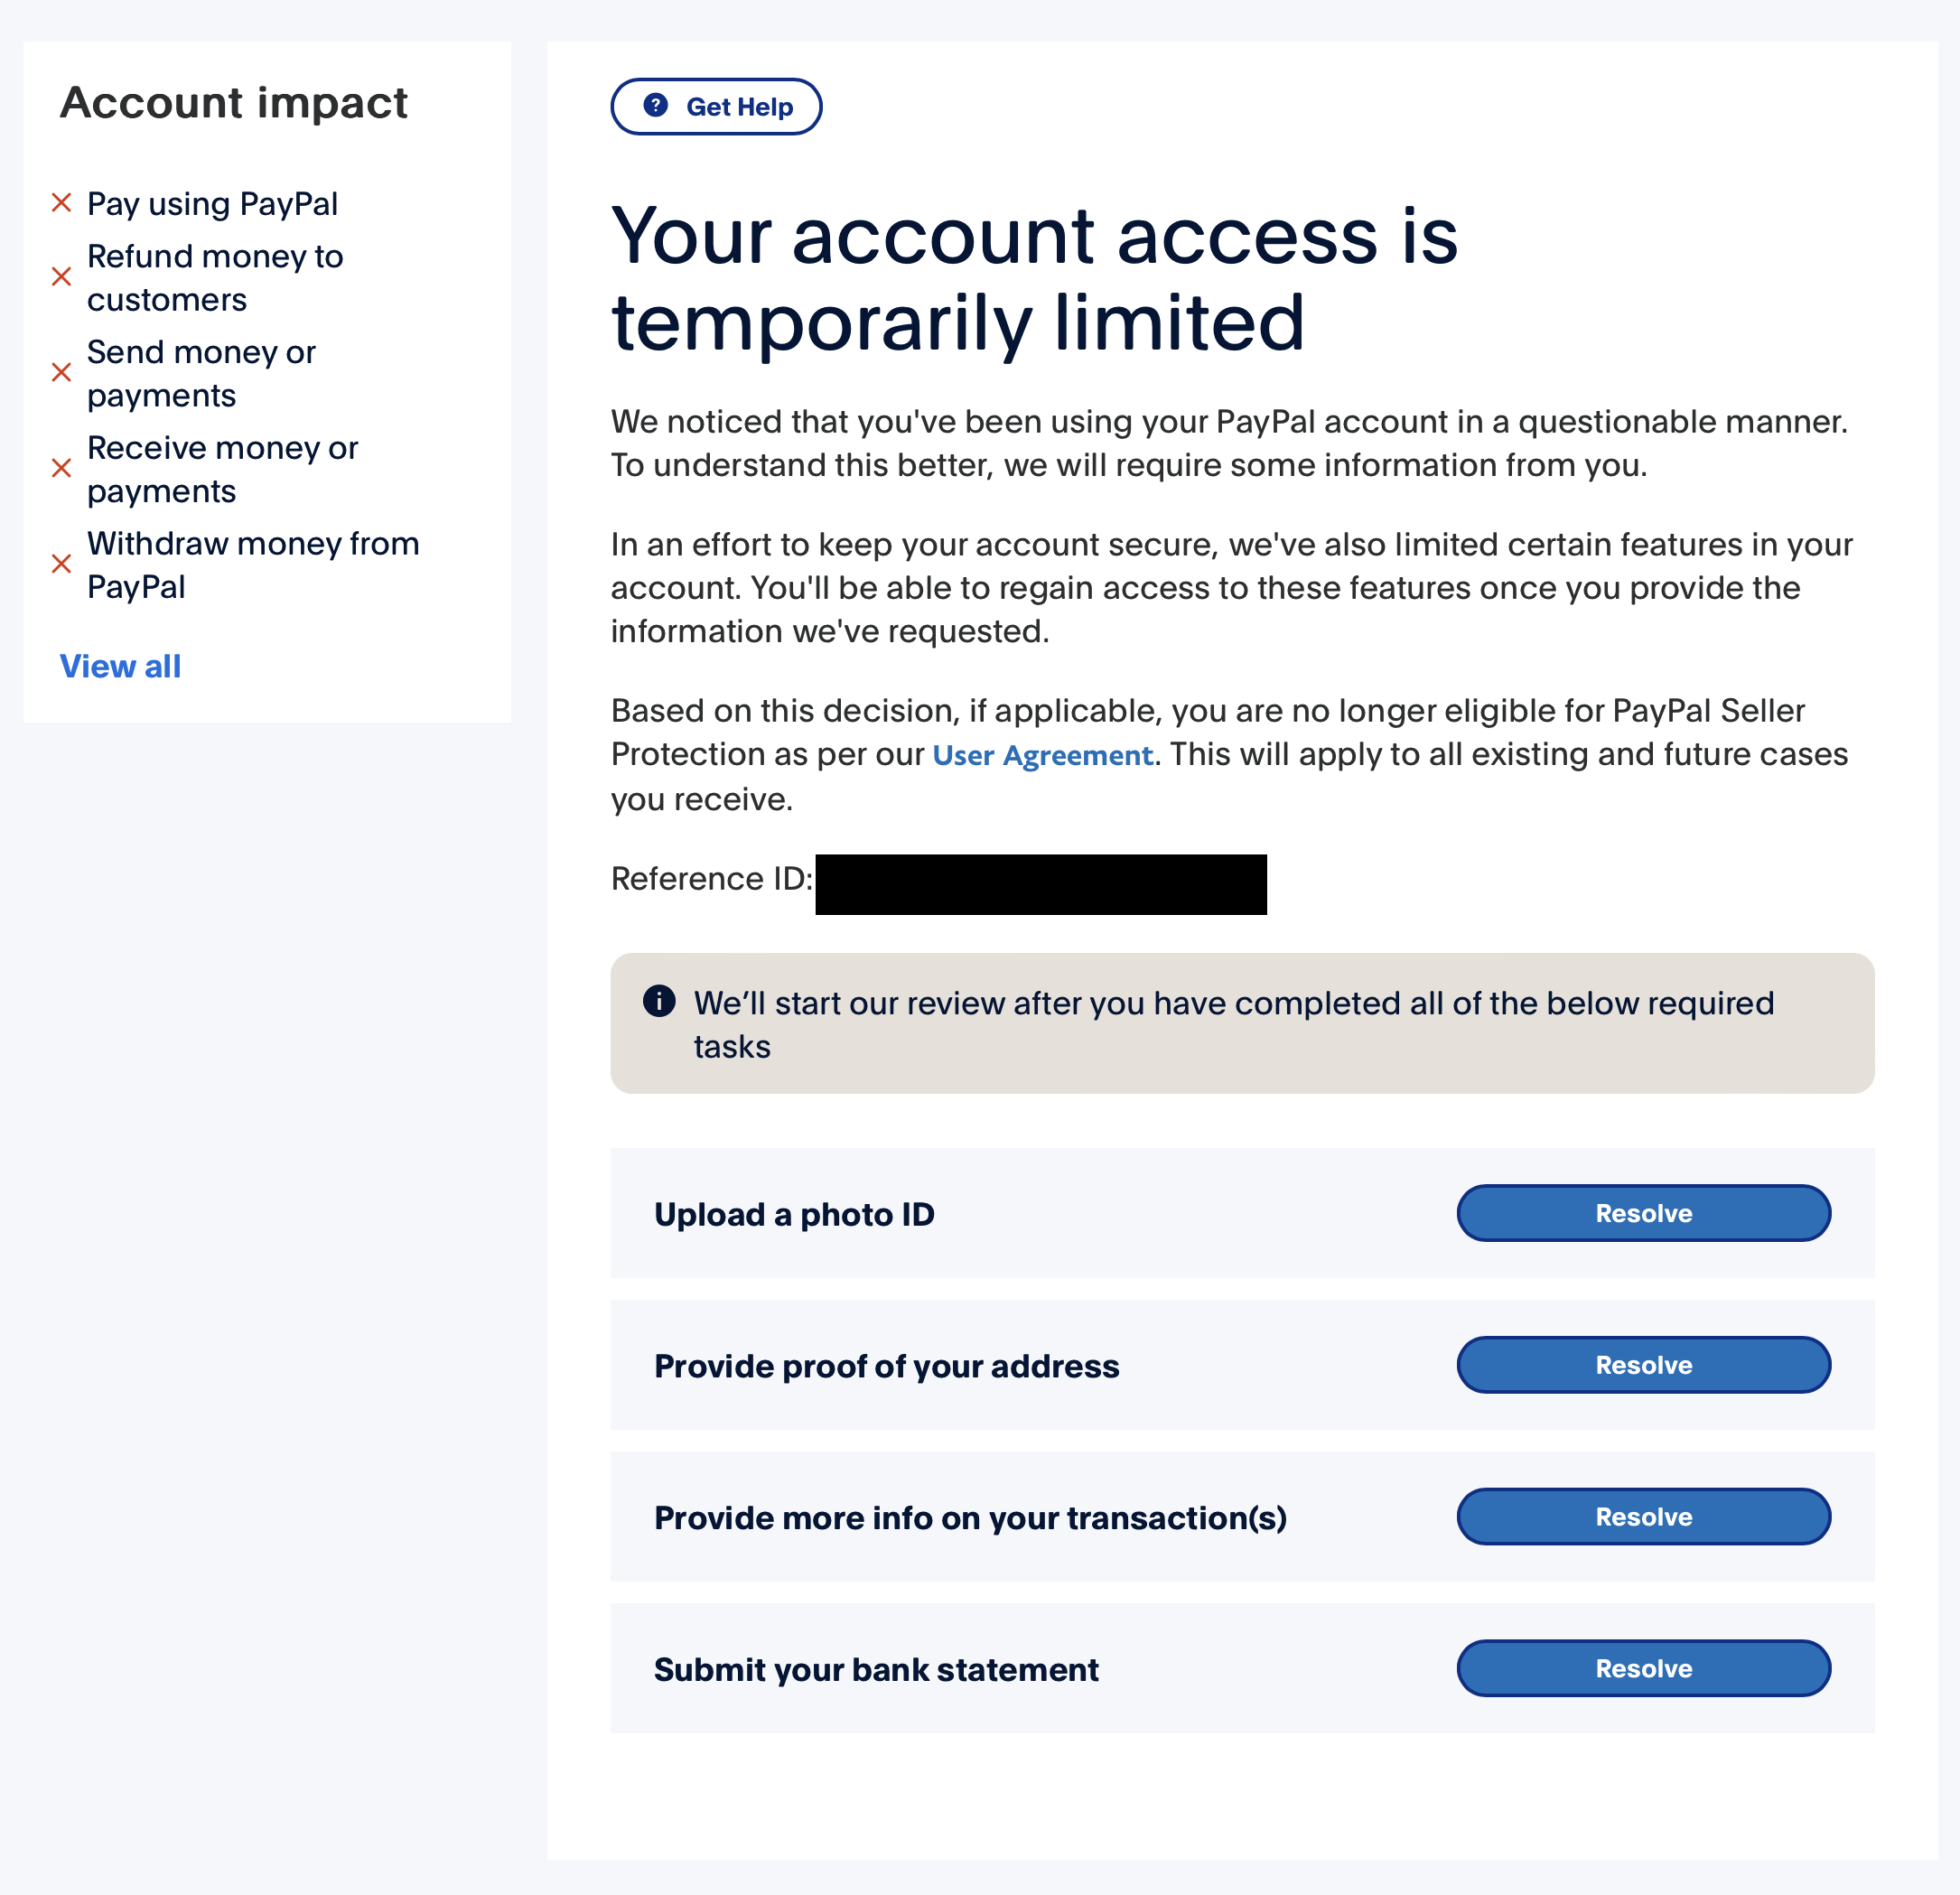 PayPal screen asking for detailed personal information, including bank records